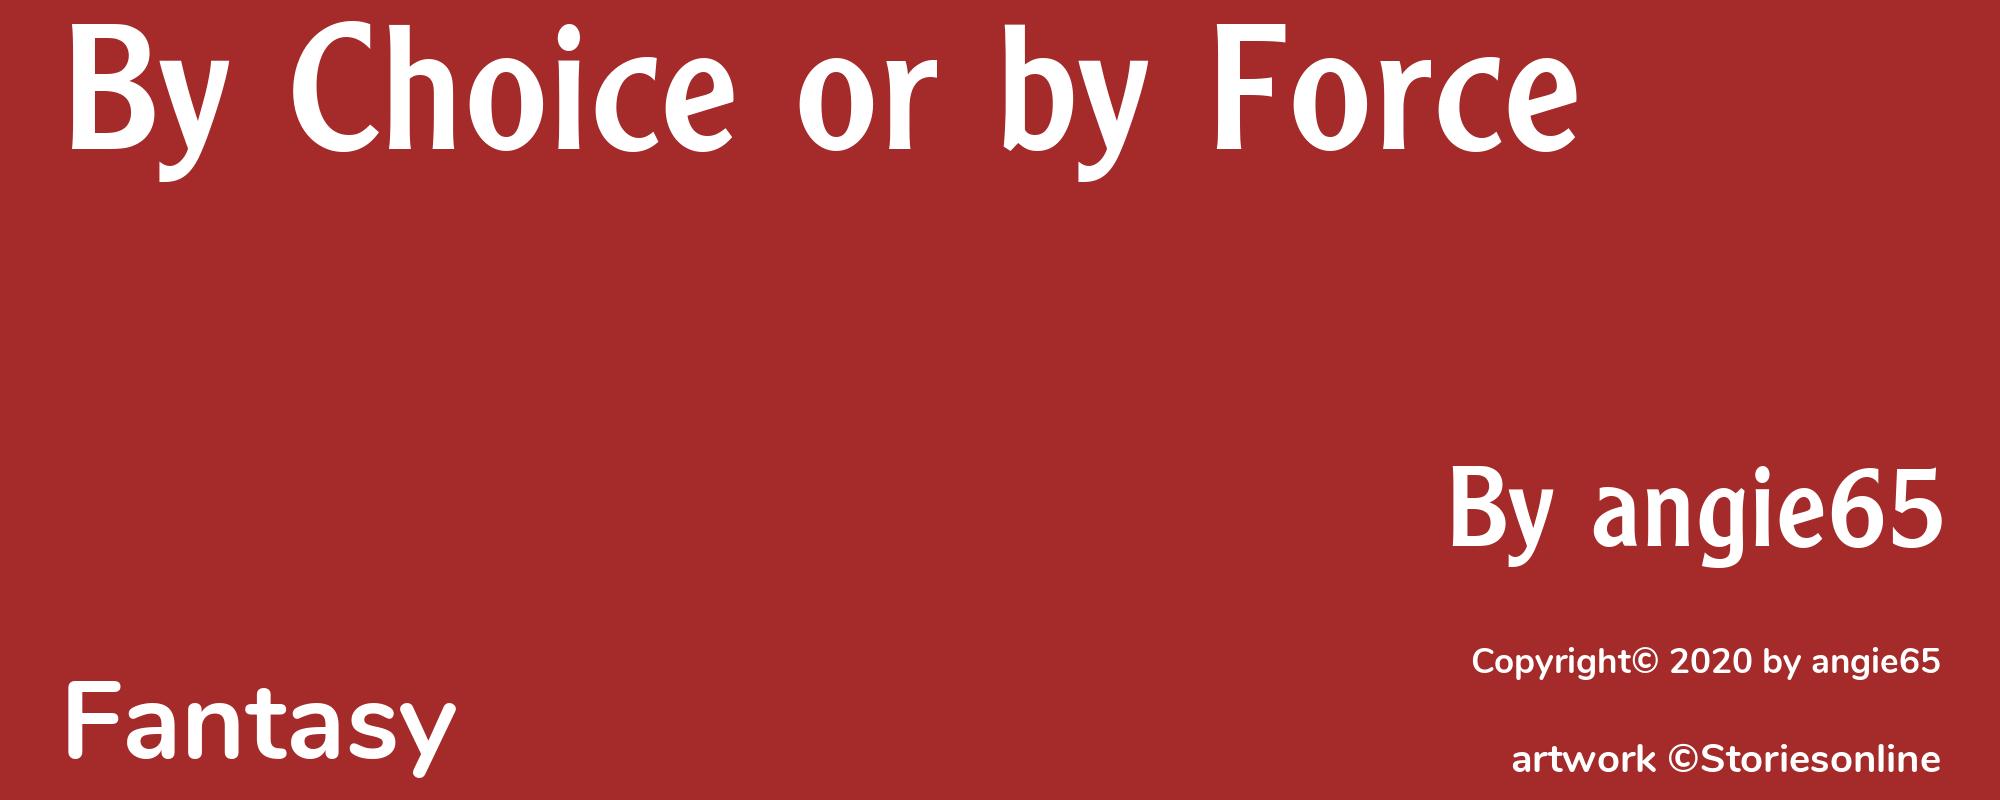 By Choice or by Force - Cover